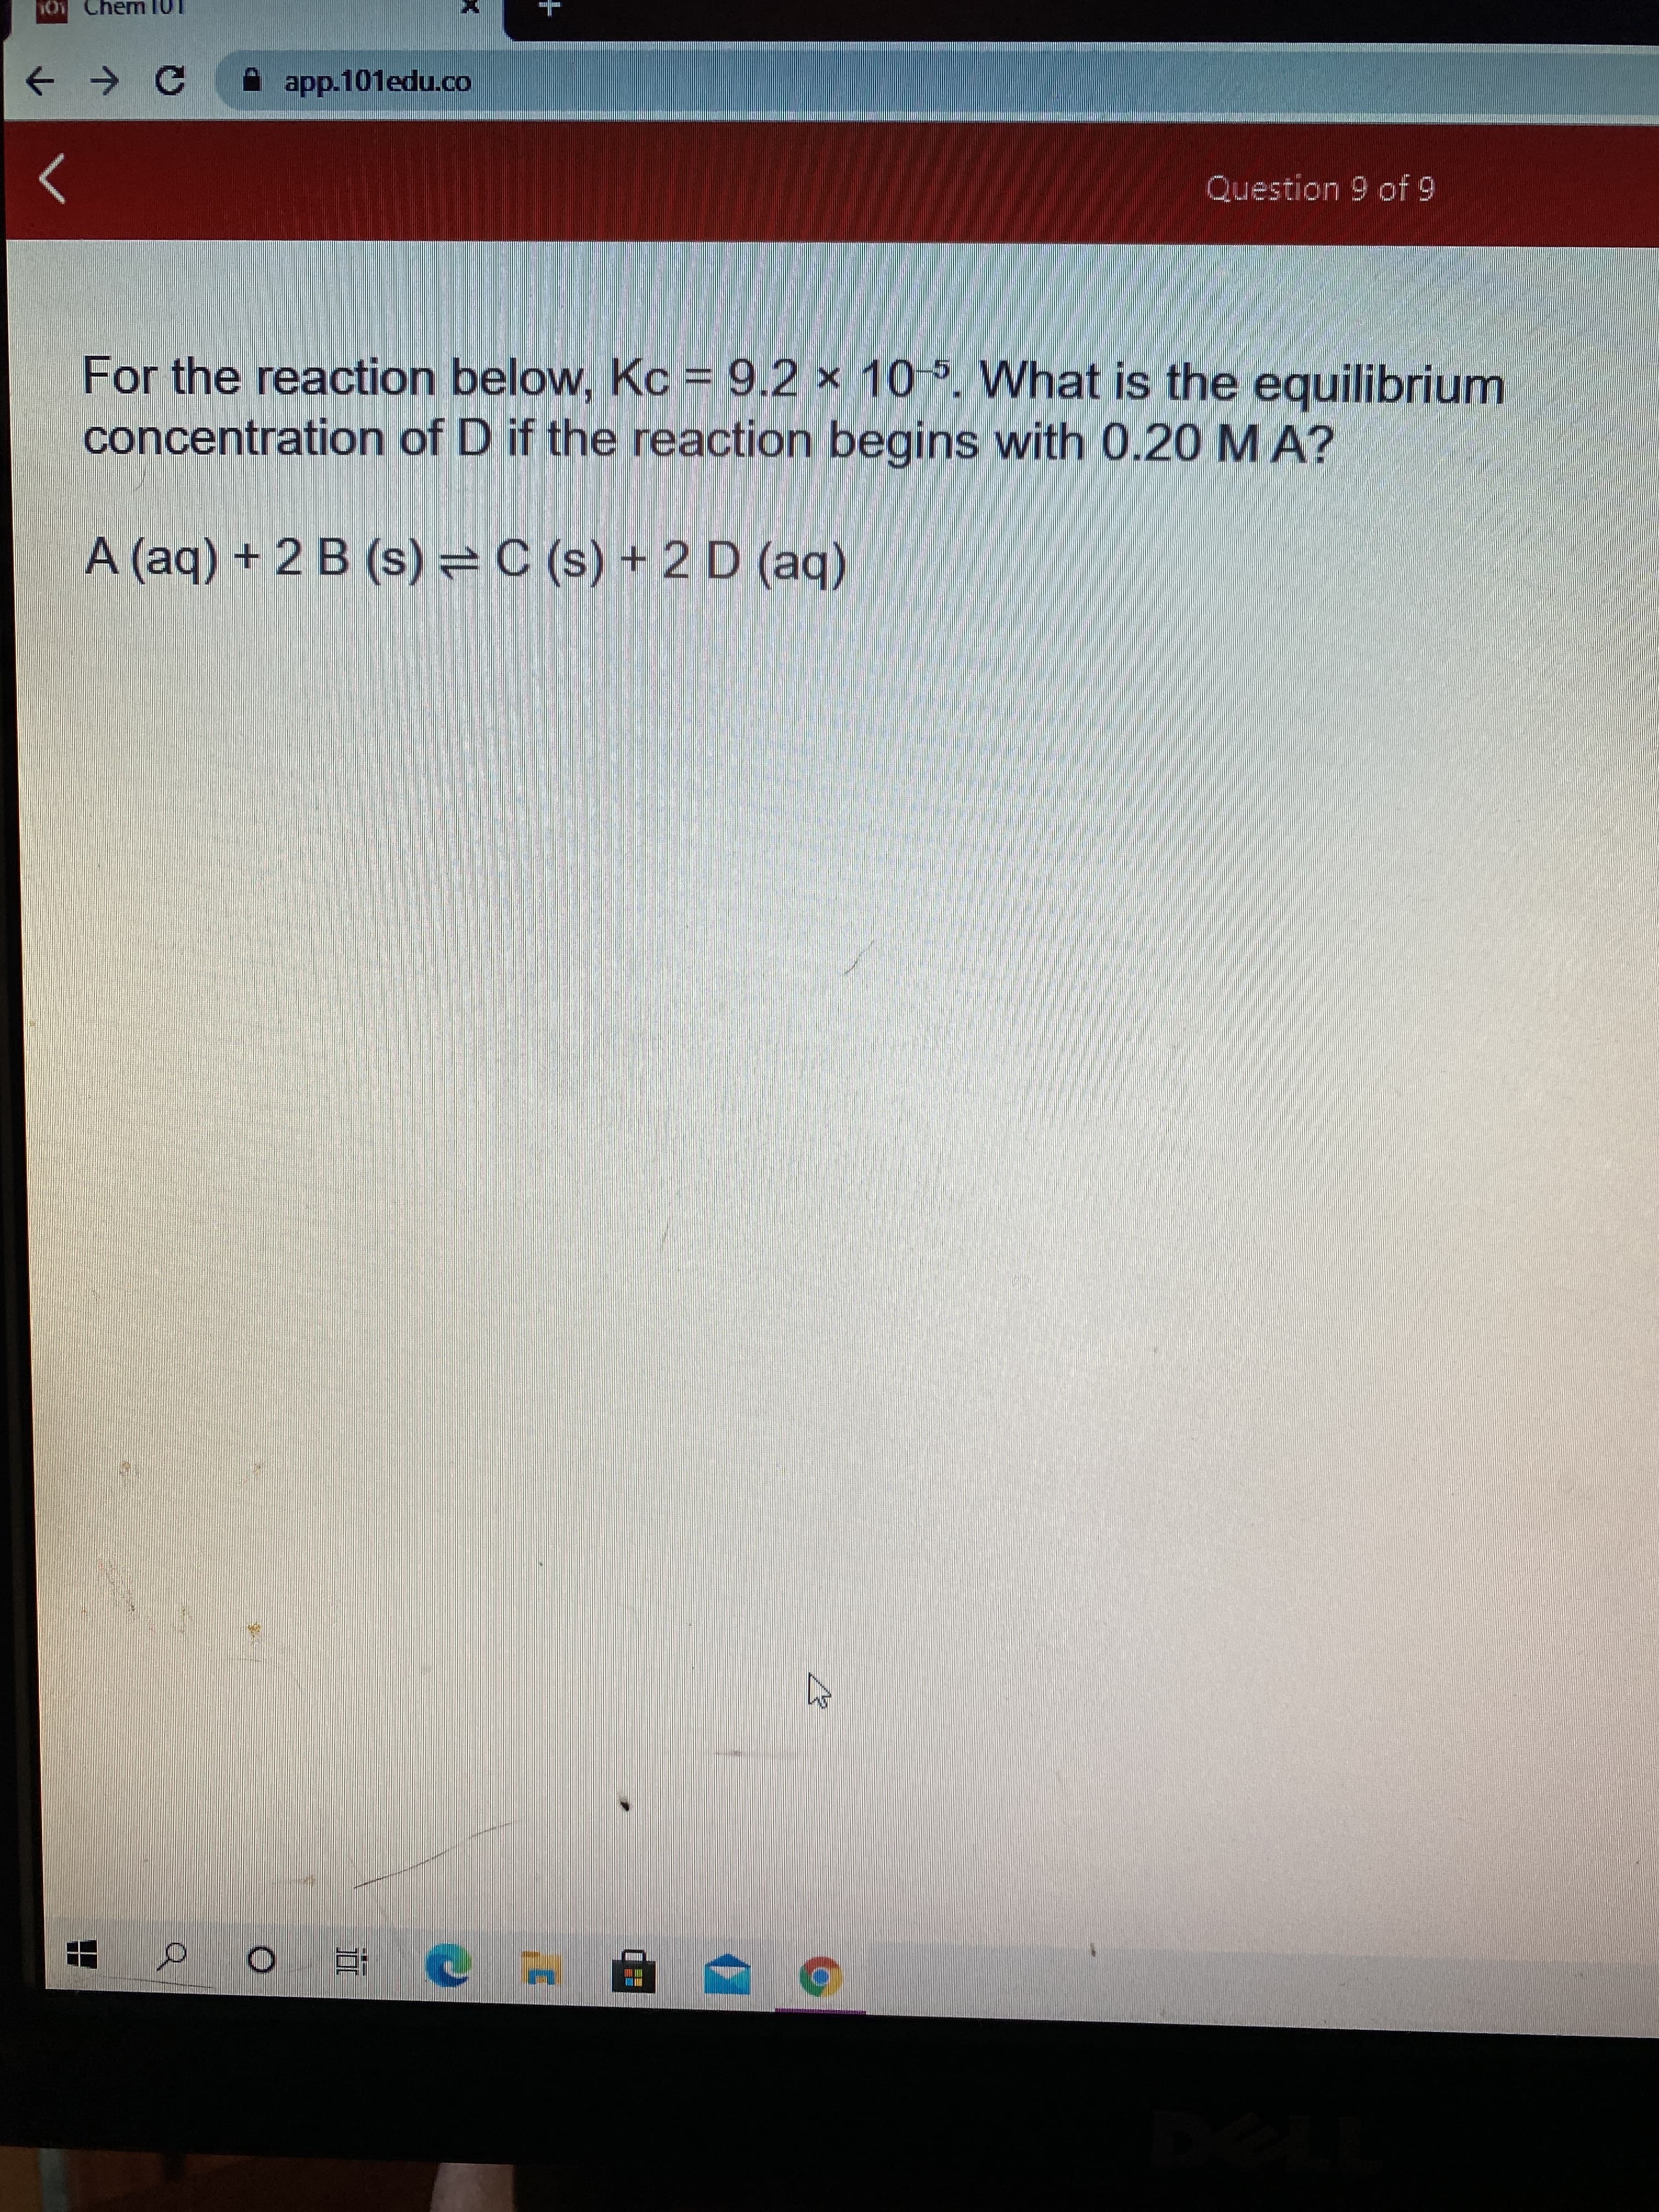 For the reaction below, Kc = 9.2 × 10 5. What is the equilibrium
concentration of D if the reaction begins with 0.20 MA?
A (aq) + 2 B (s) =C (s) + 2 D (aq)
